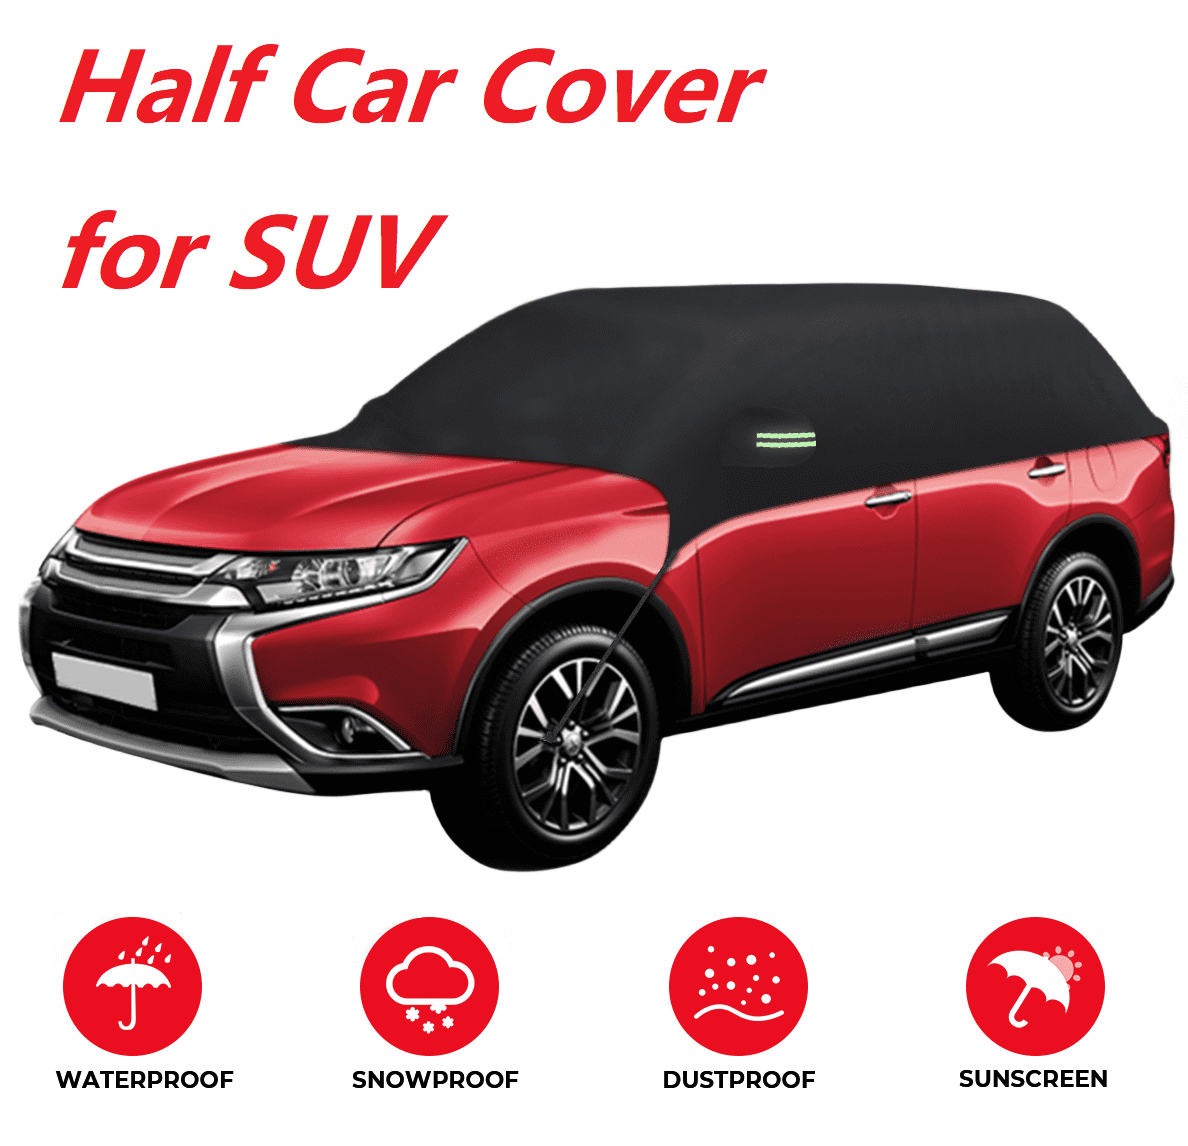 Car Windshield Snow Cover, Half Car Cover Top Waterproof All Weather,  Winter car Cover Windproof Dustproof UV Resistant Snowproof Car Body  Covers